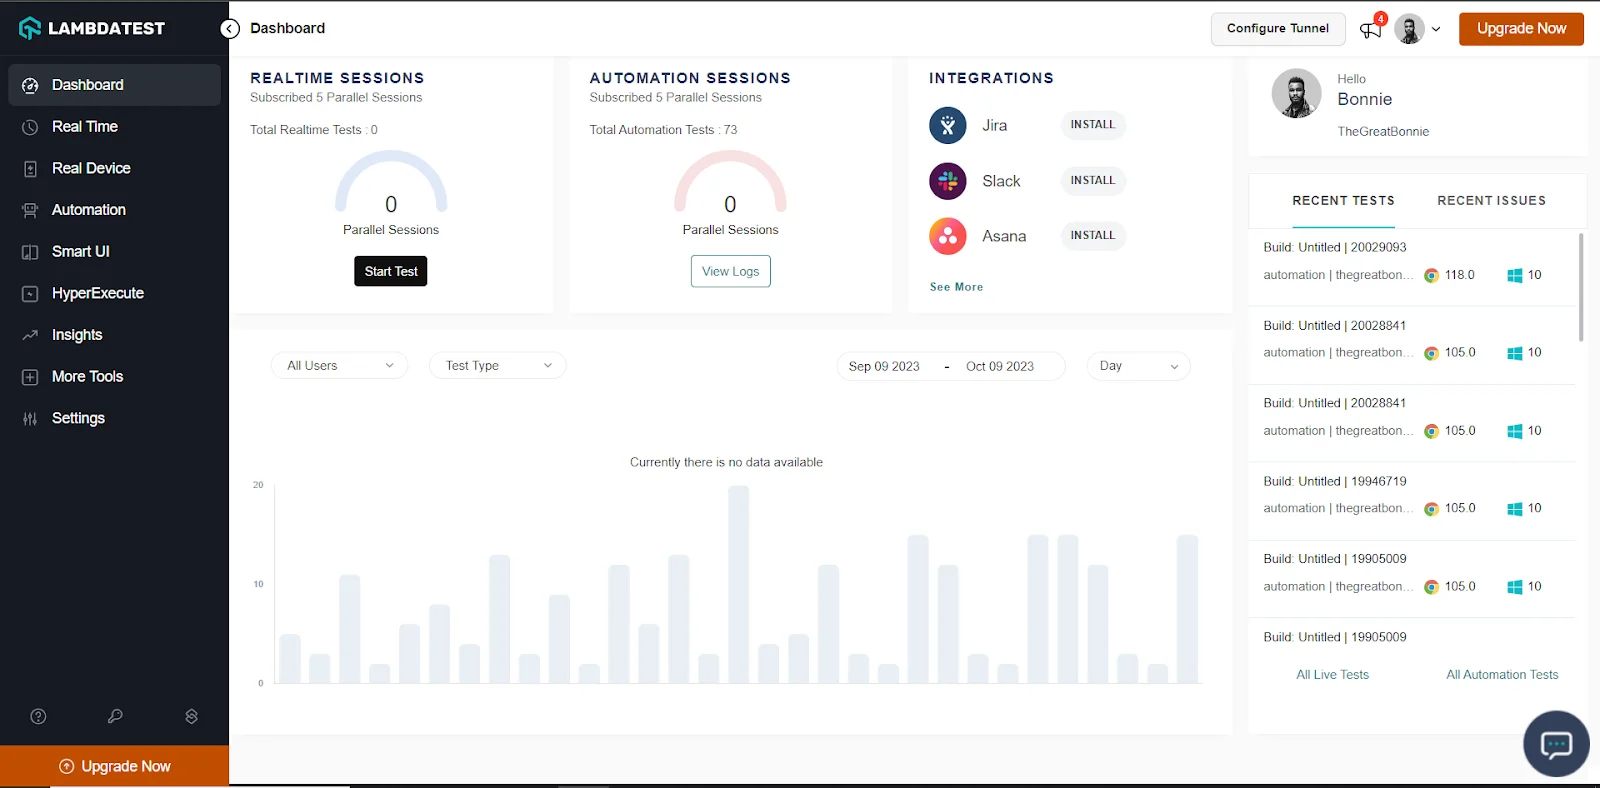 LambdaTest Dashboard and on the right side of the screen